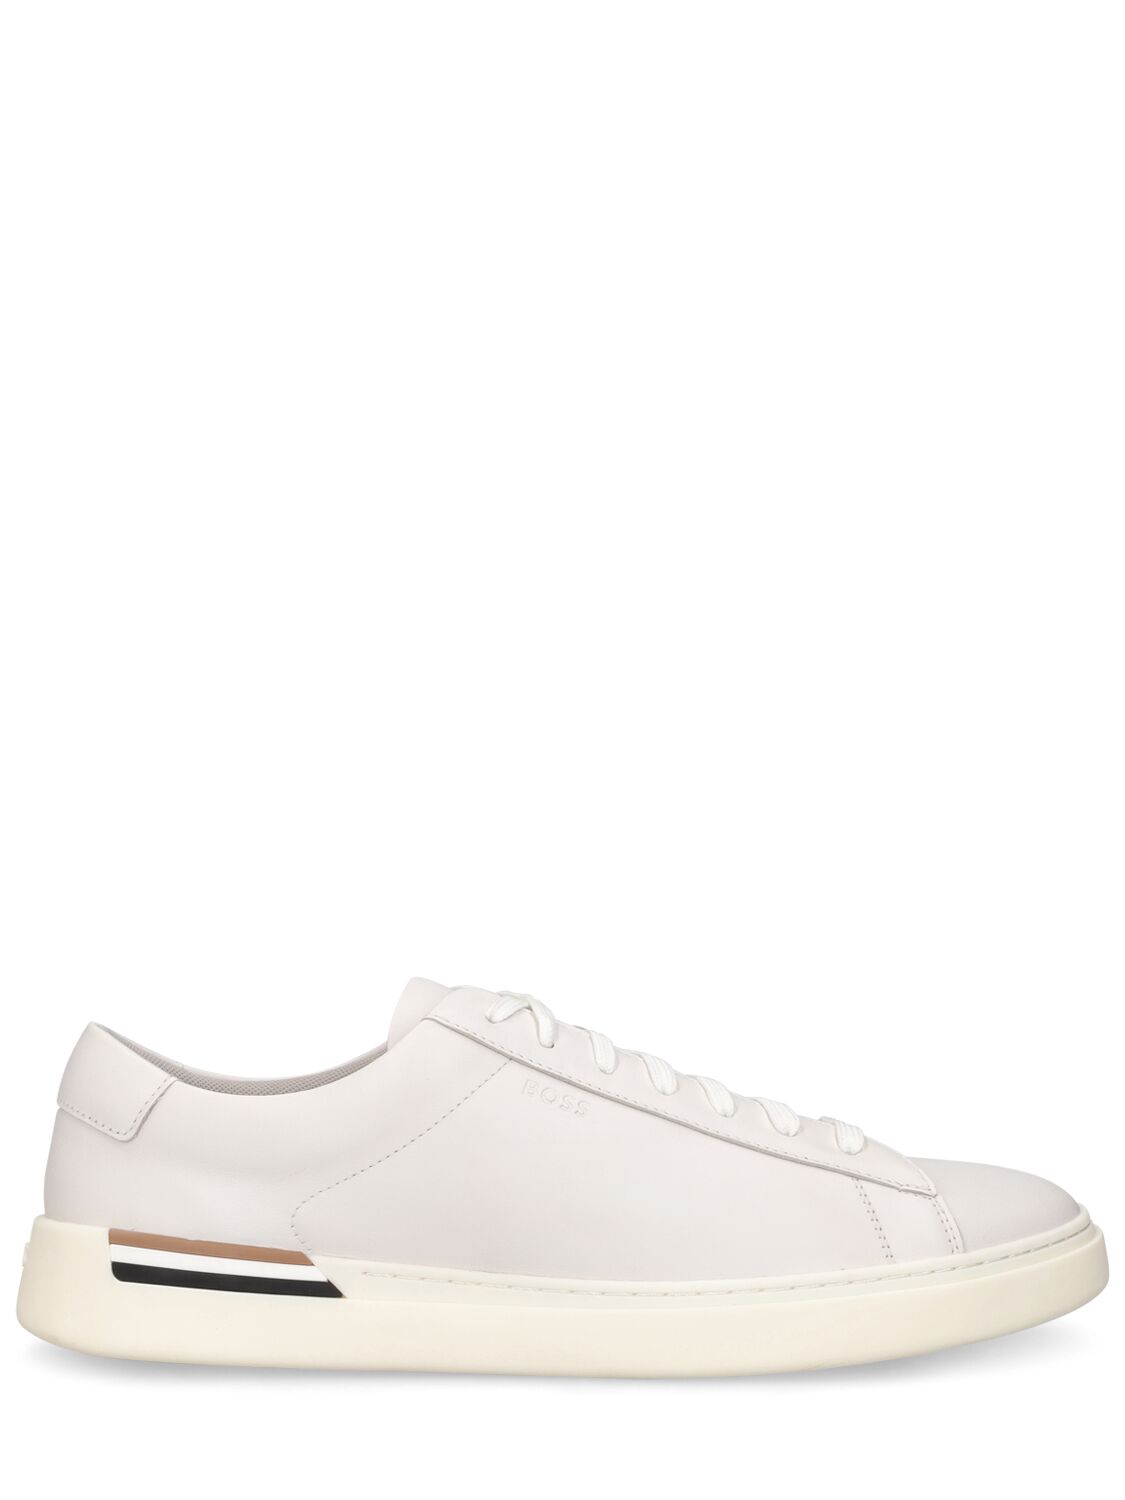 Image of Clint Tennltt Leather Low Top Sneakers